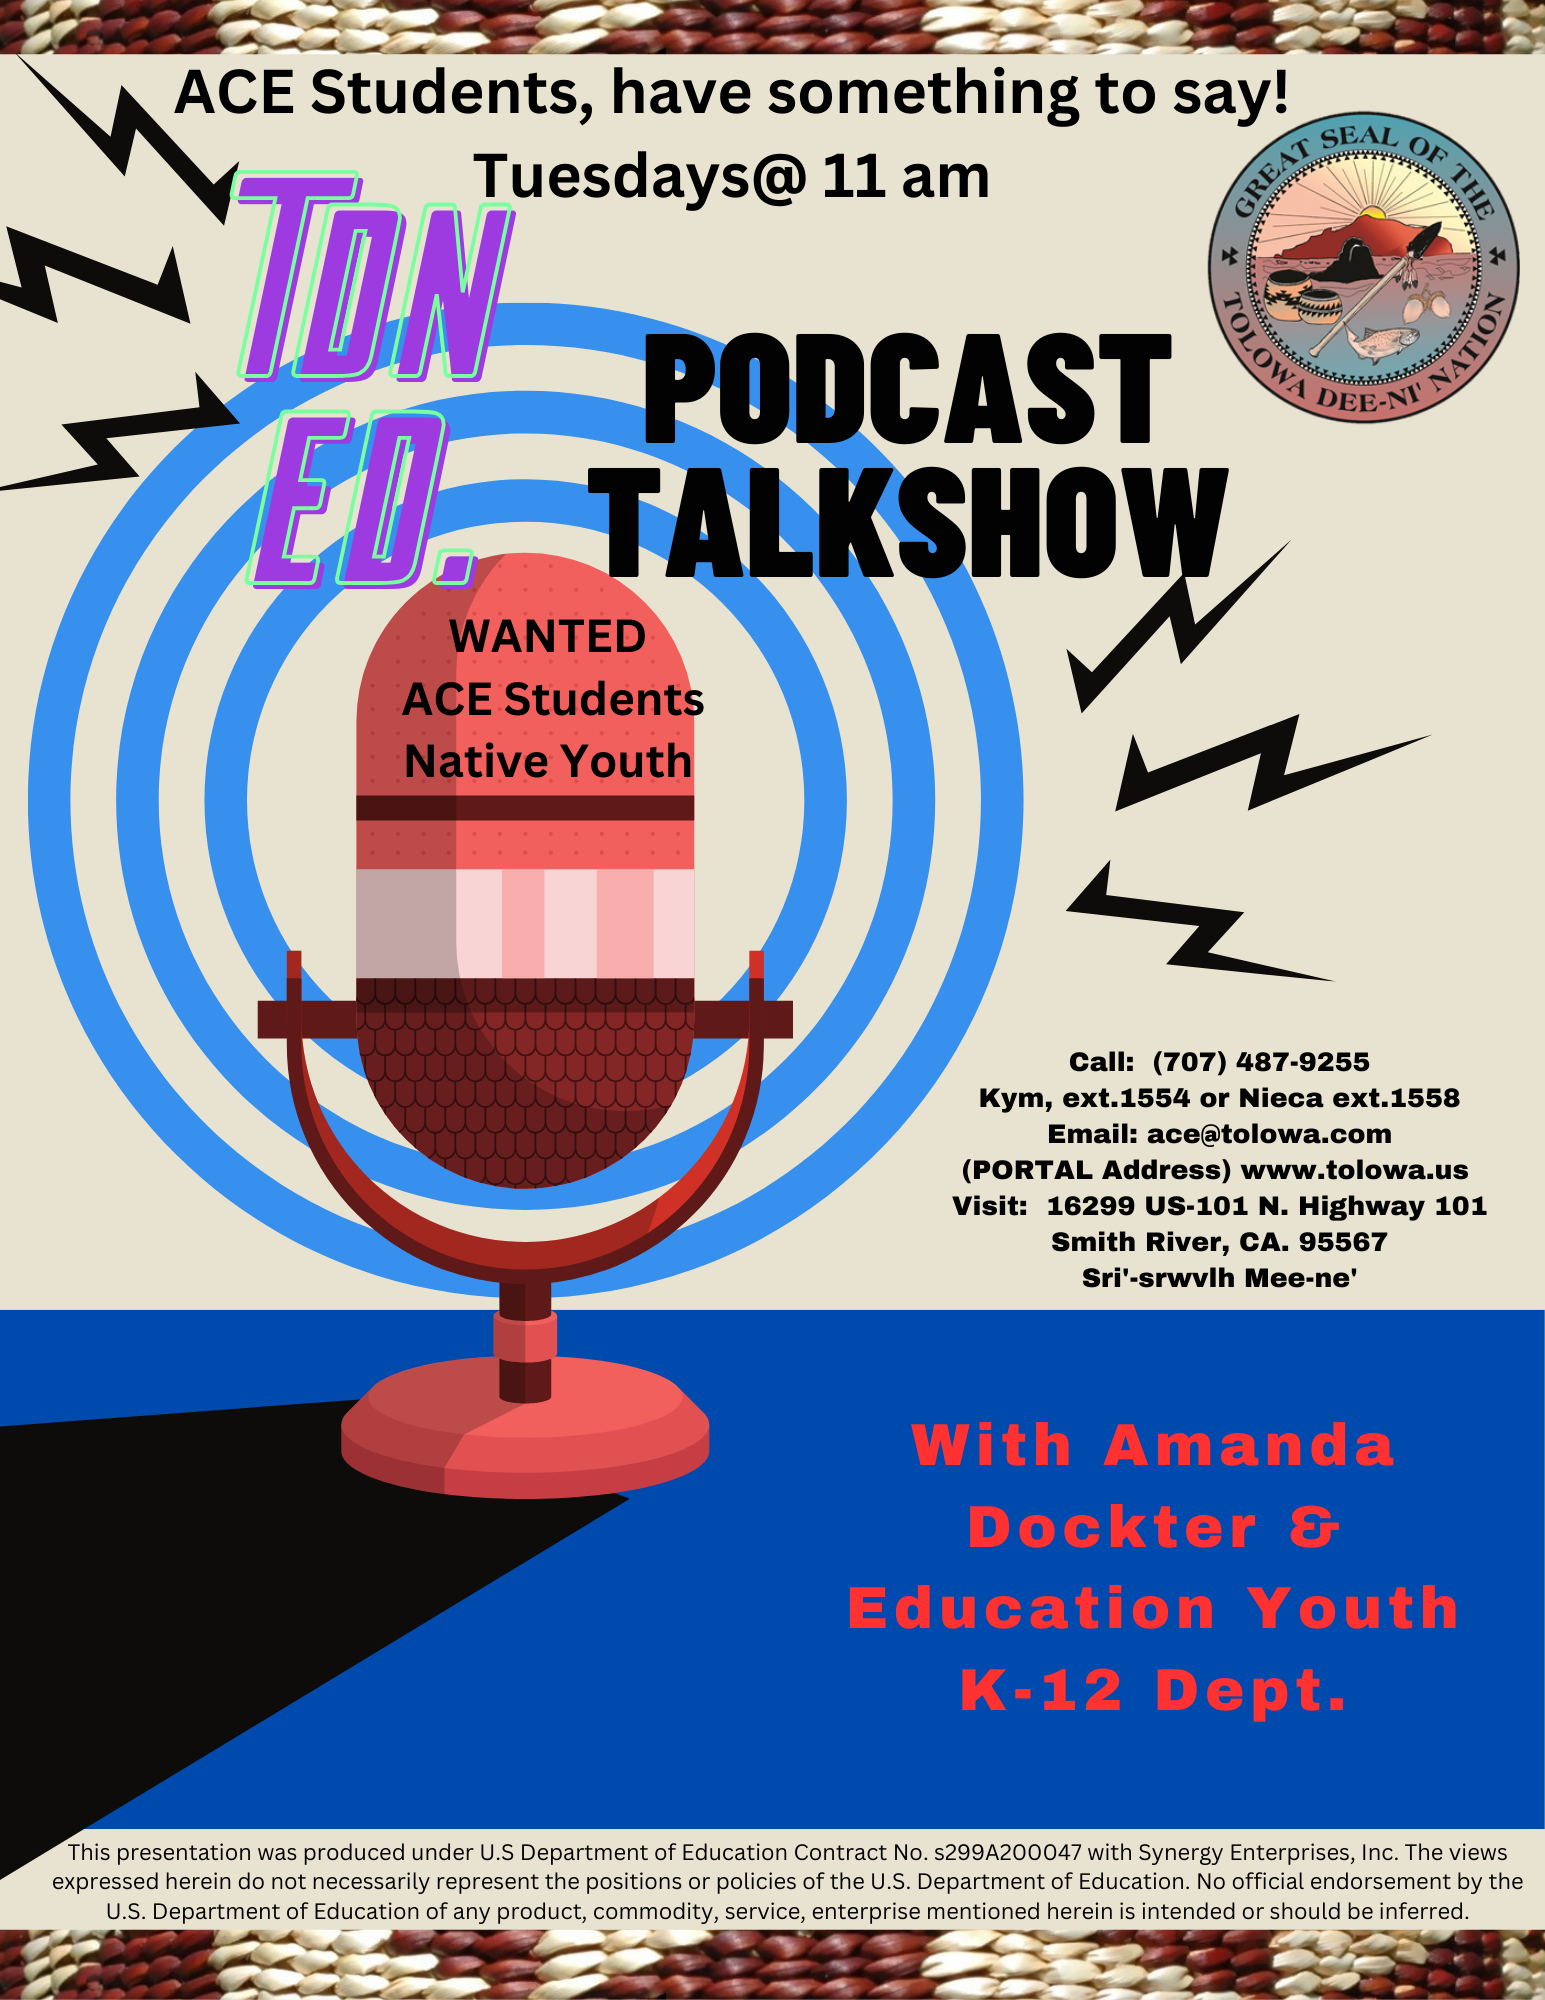 Flyer for the TDN ED. Podcast Talkshow, featuring ACE Students and Native Youth. The show airs Tuesdays at 11 am. Contact information includes a phone number (707-487-9255), extensions 1554 for Kym and 1558 for Nieca, and the email ace@tolowa.com. The flyer also features the Great Seal of the Tolowa Dee-ni' Nation.